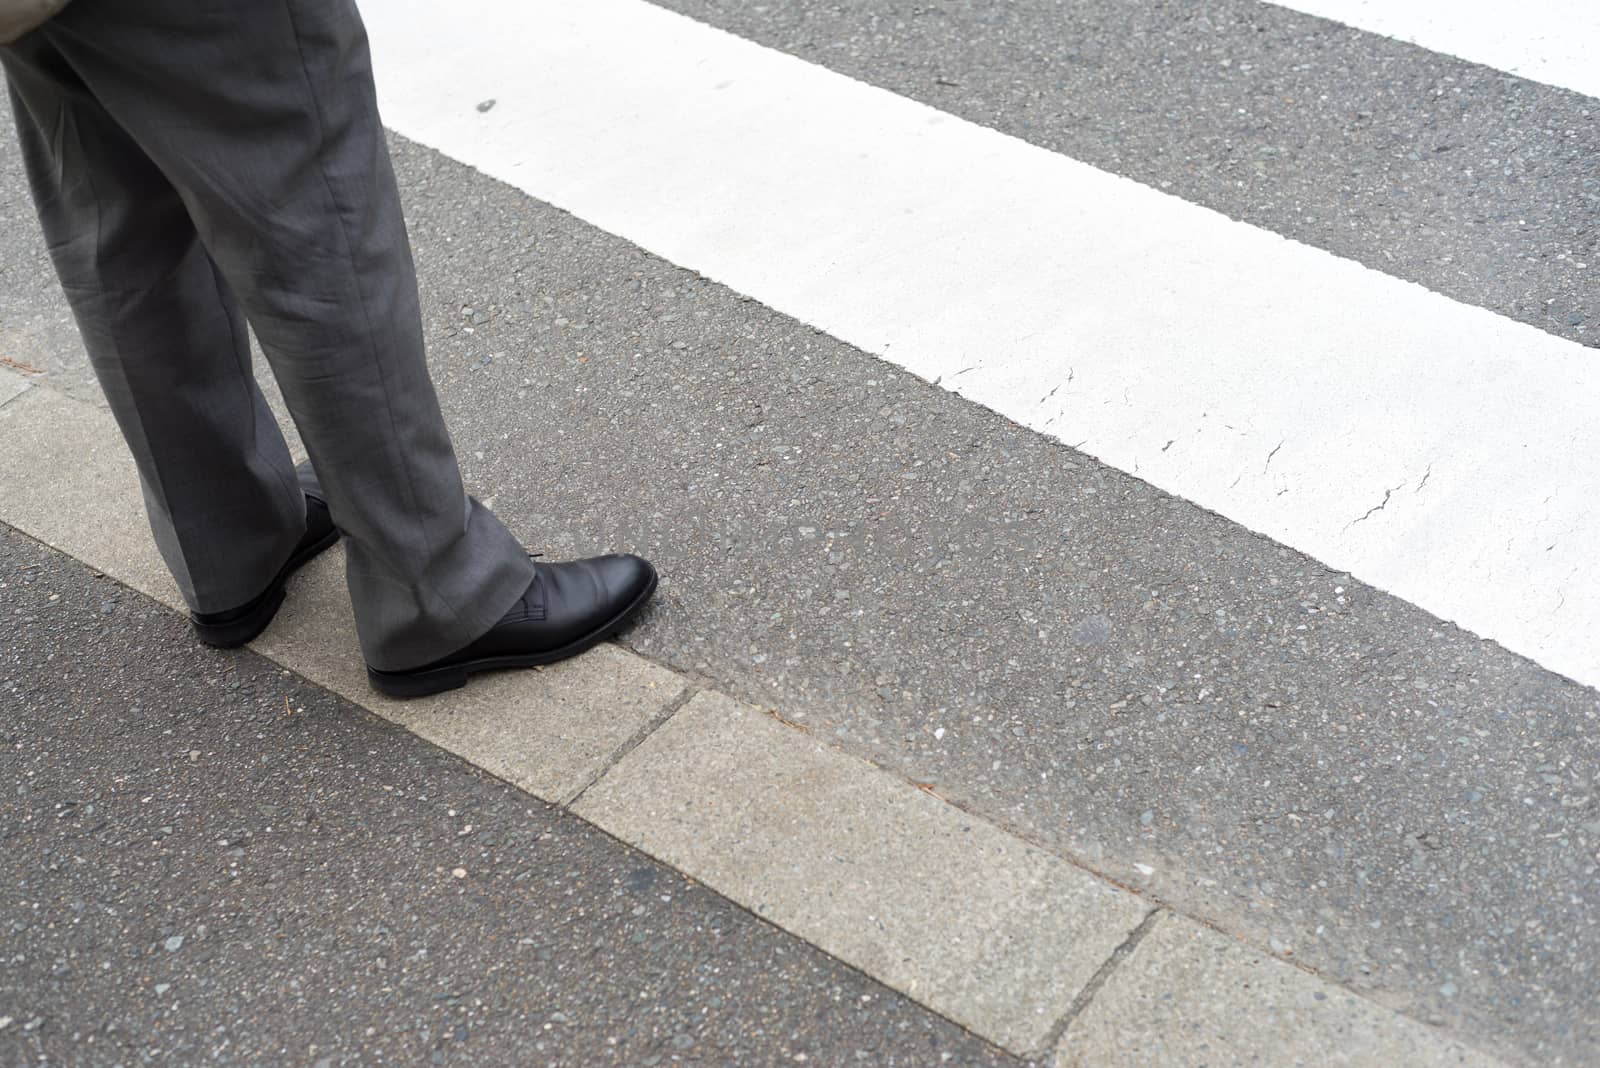 Man legs in slag pants with shoes waiting to cross the street at a crosswalk